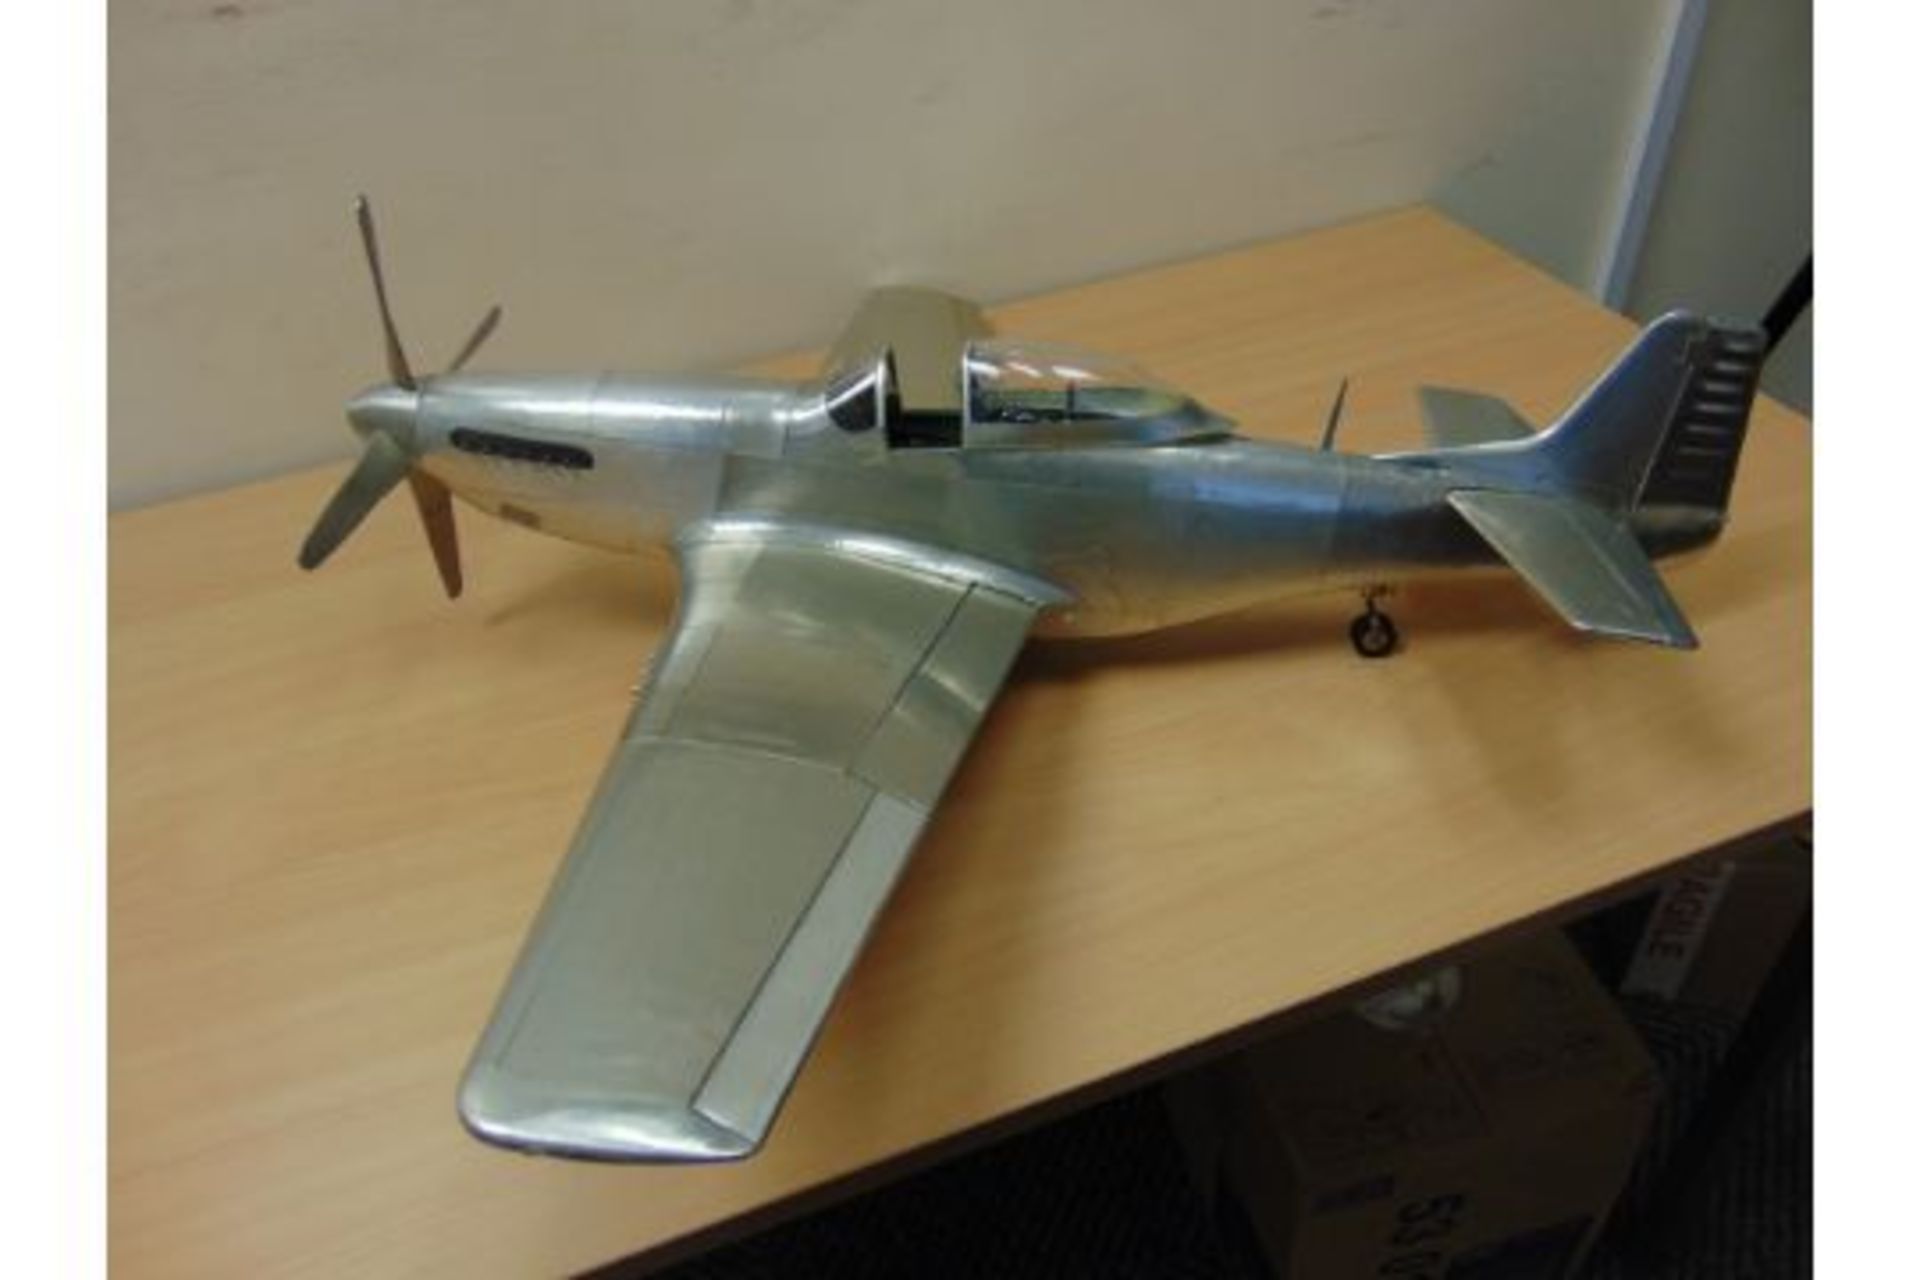 SUPERB DETAILED SCALE MODEL OF A P51 MUSTANG - Image 5 of 7